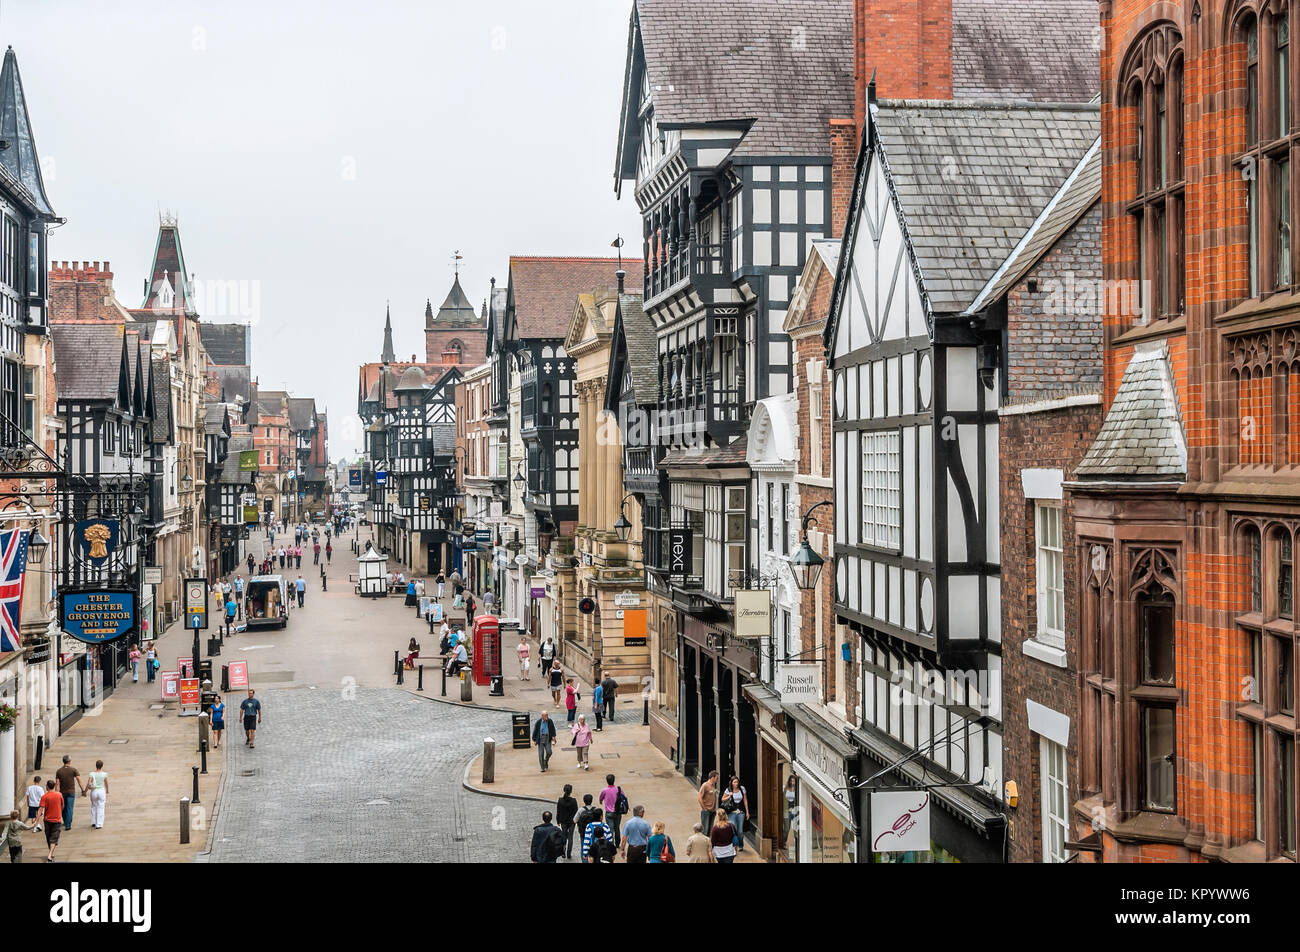 Cityscape at the old town of Chester, Cheshire, England, UK Stock Photo